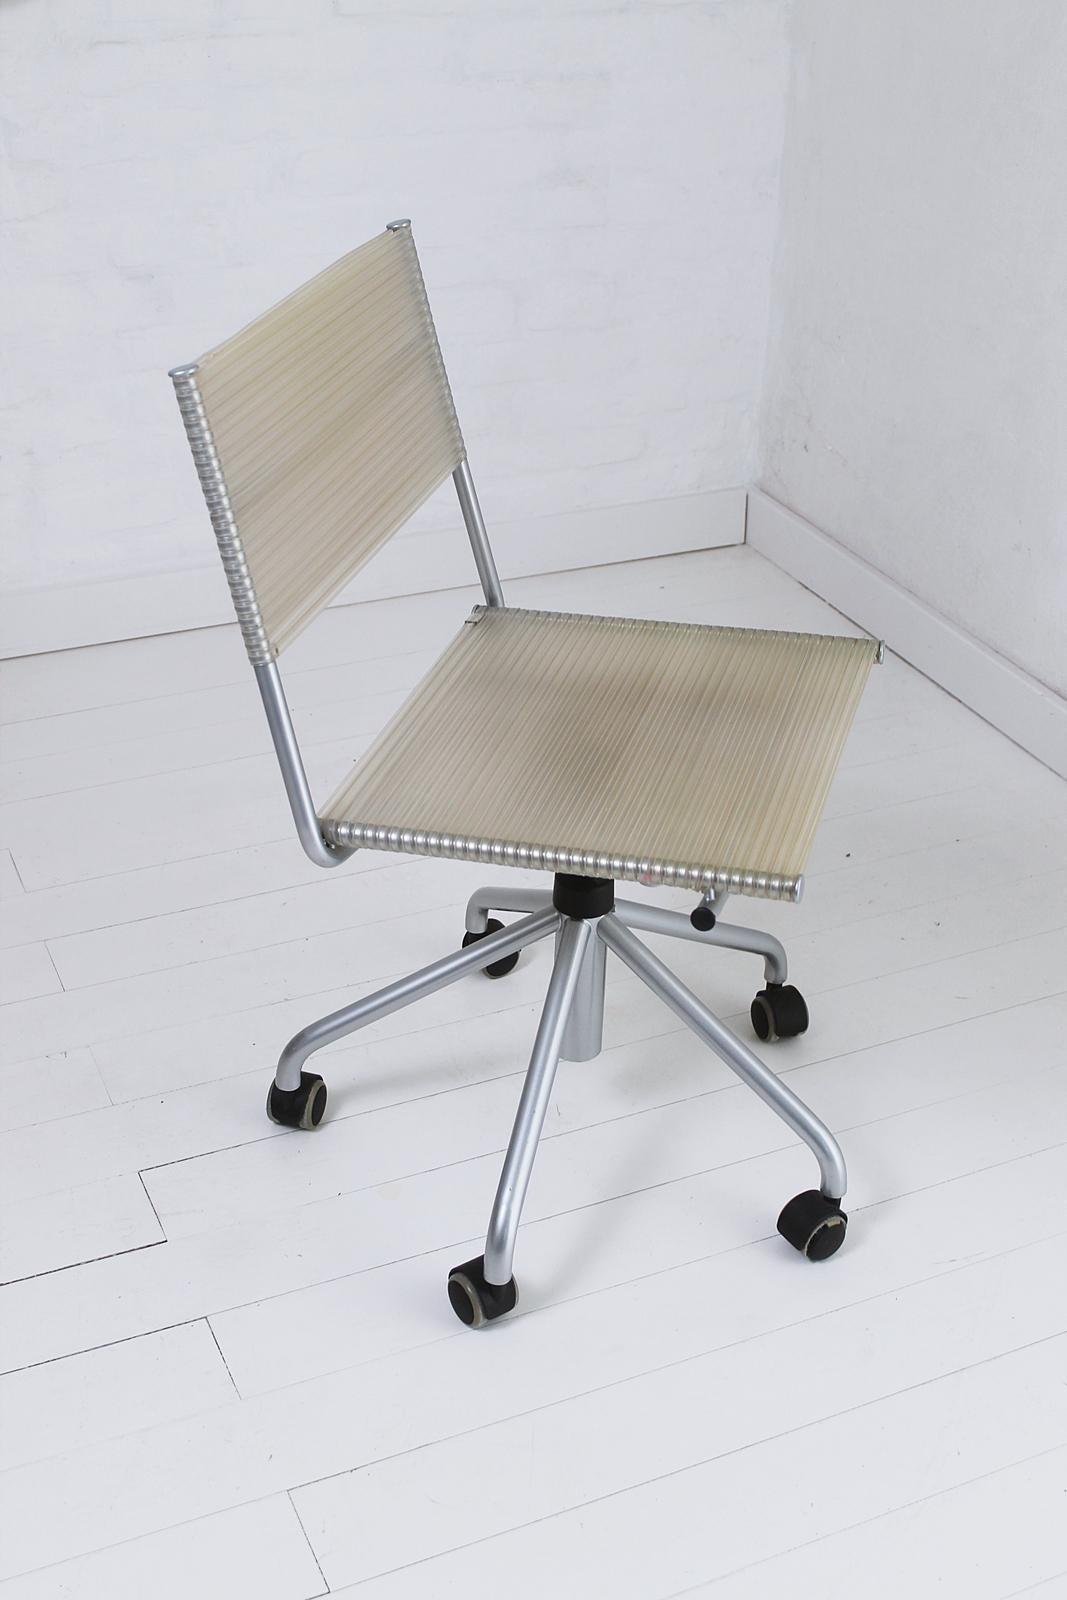 Rare vintage Italian Miss B desk chair by Tito Agnoli.
In the edition of Bonacina that is no longer in production.
The chair is adjustable in seat height between 47 and 57 cm by rotating it.